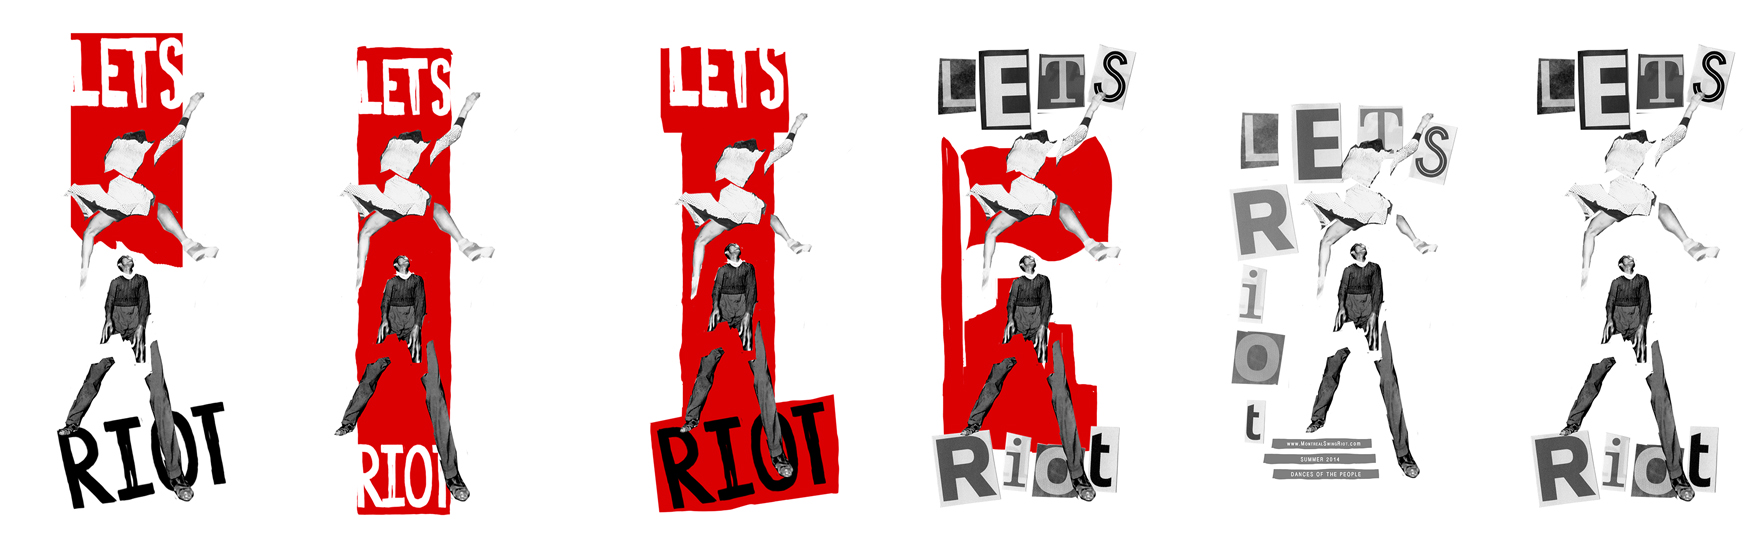 Montreal Swing Riot Event Design Cutouts Process with color